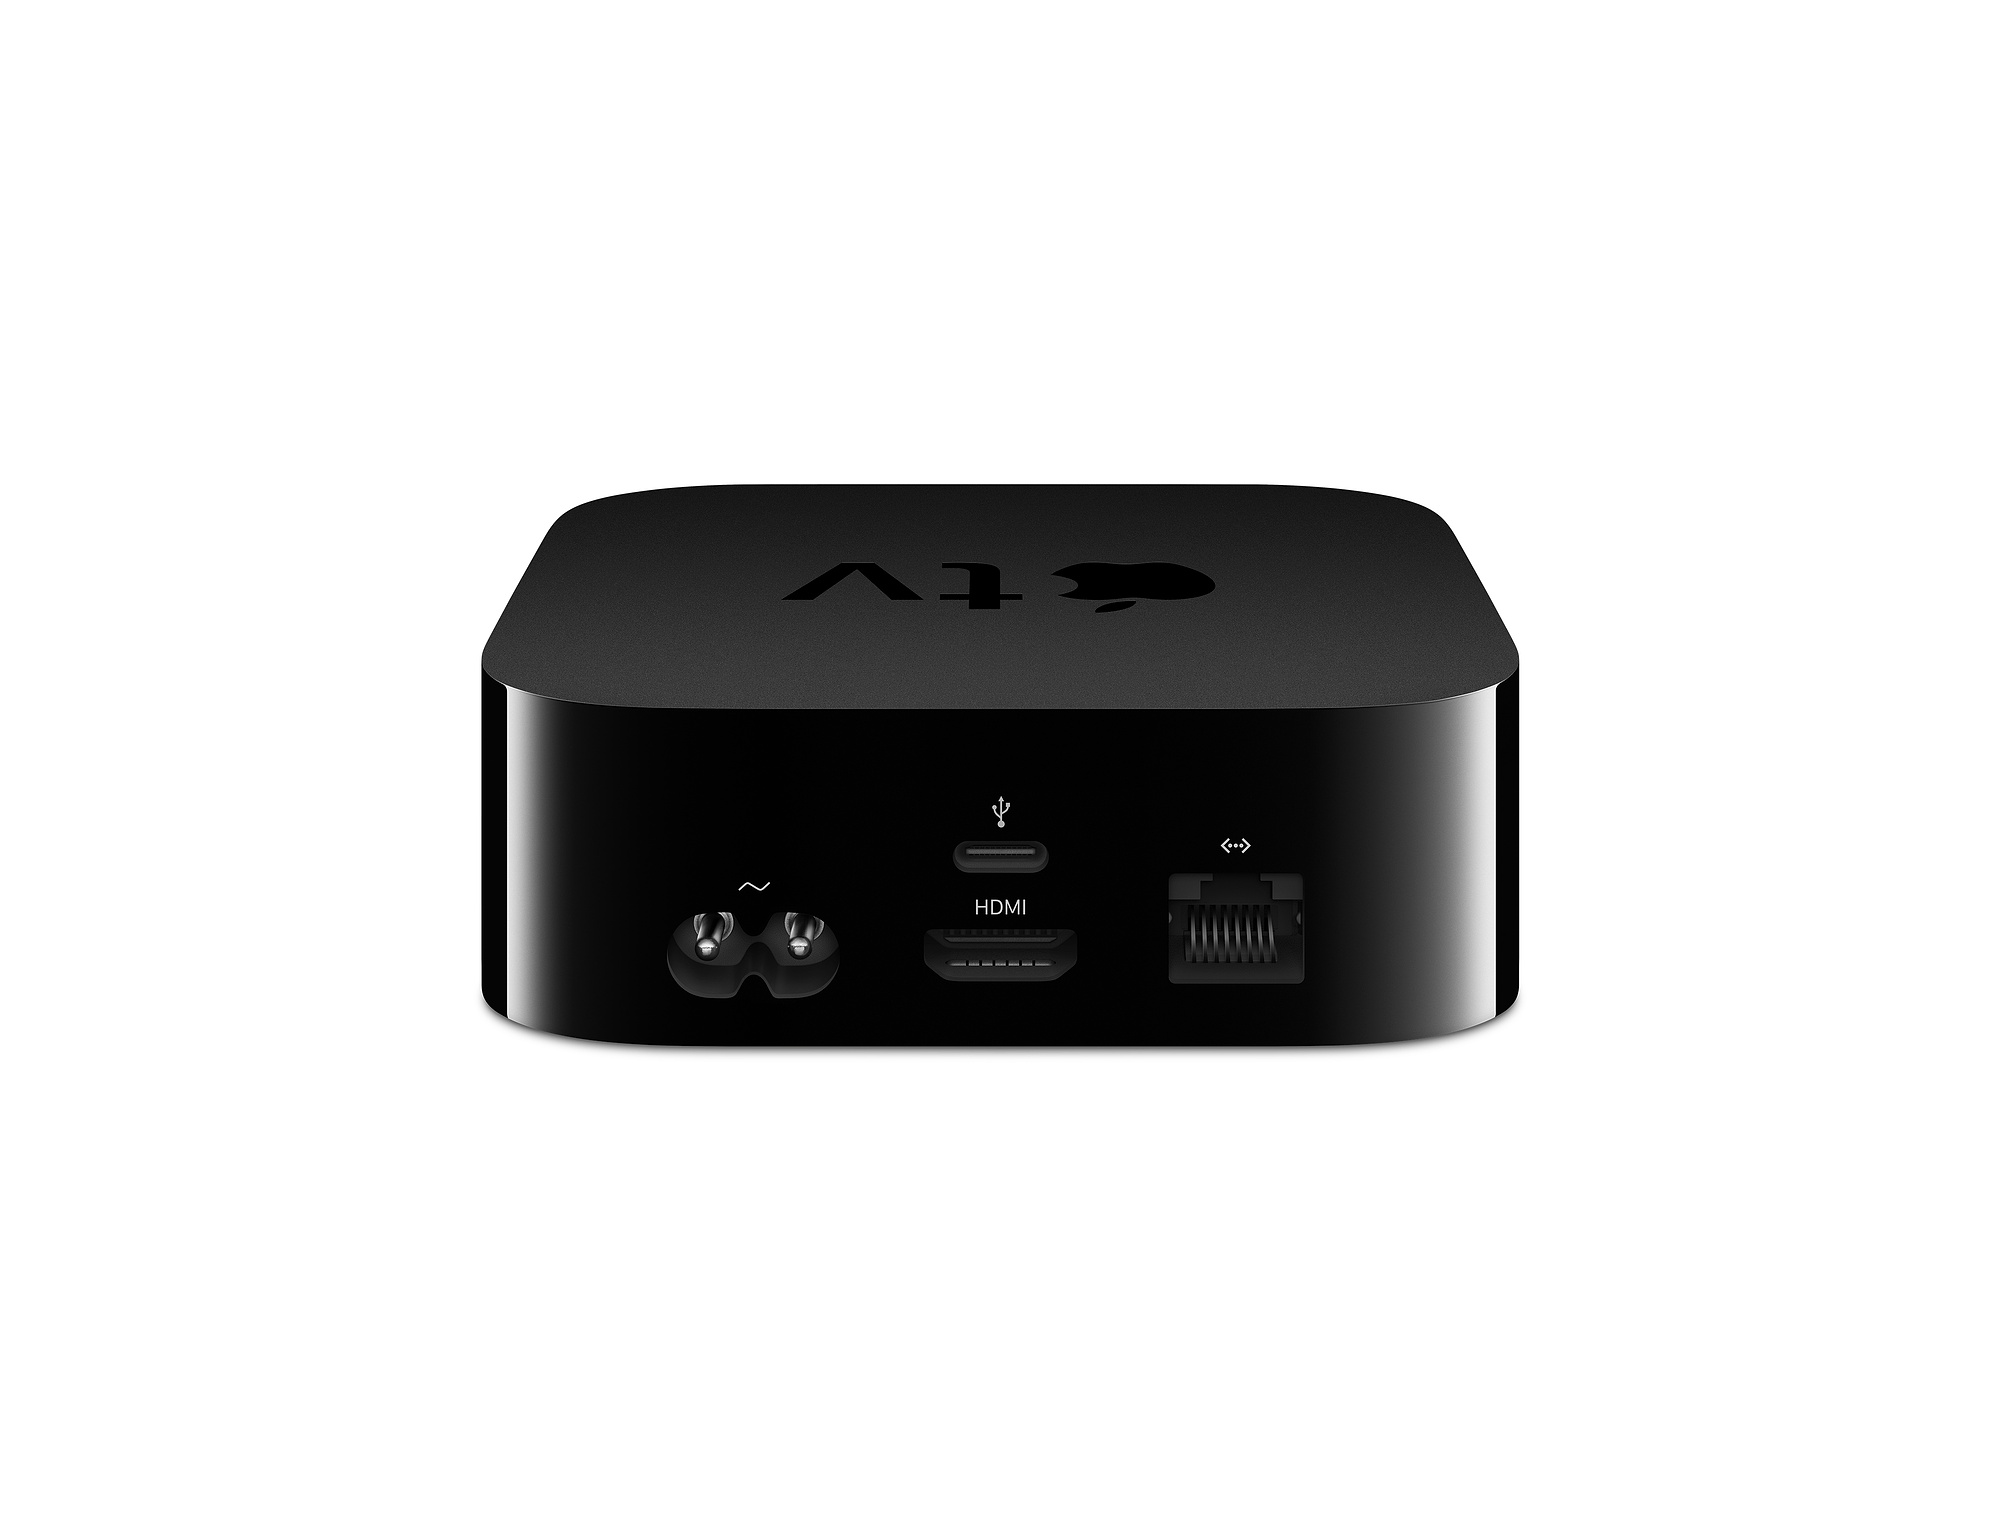 Apple TV remote not working